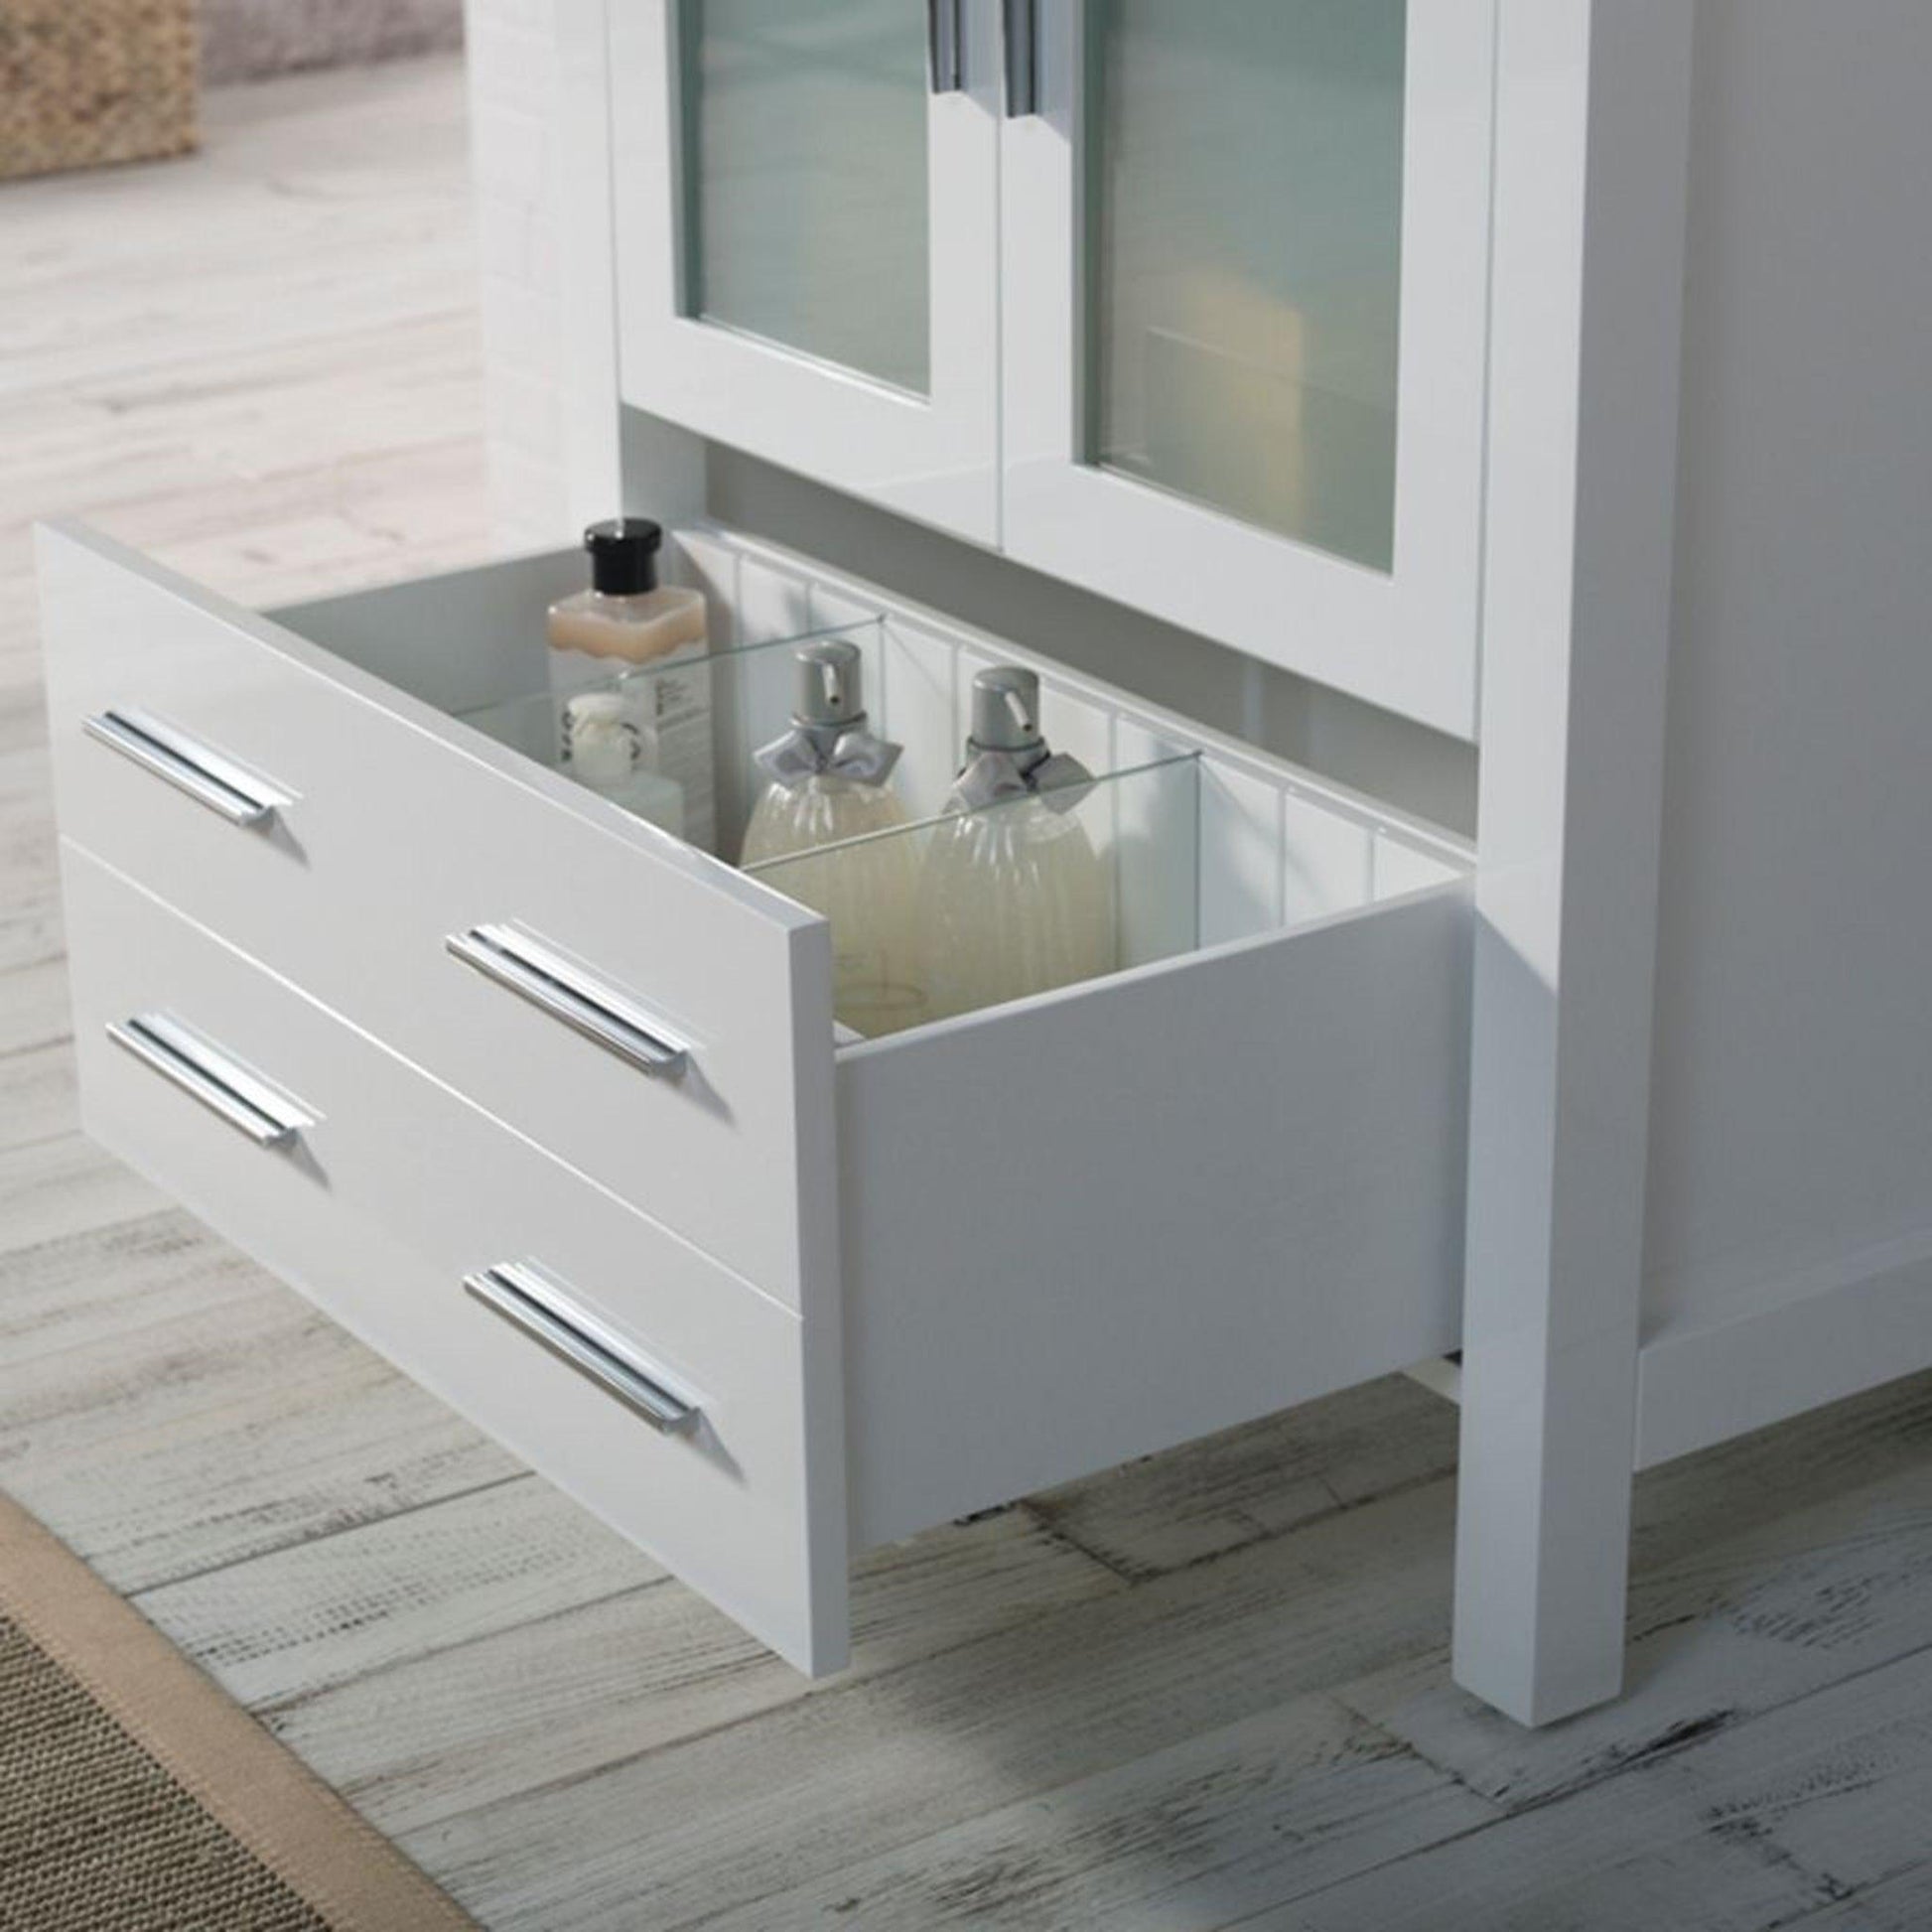 Blossom Sydney 30" White Freestanding Vanity Set With Integrated Single Sink Ceramic Top and Mirror